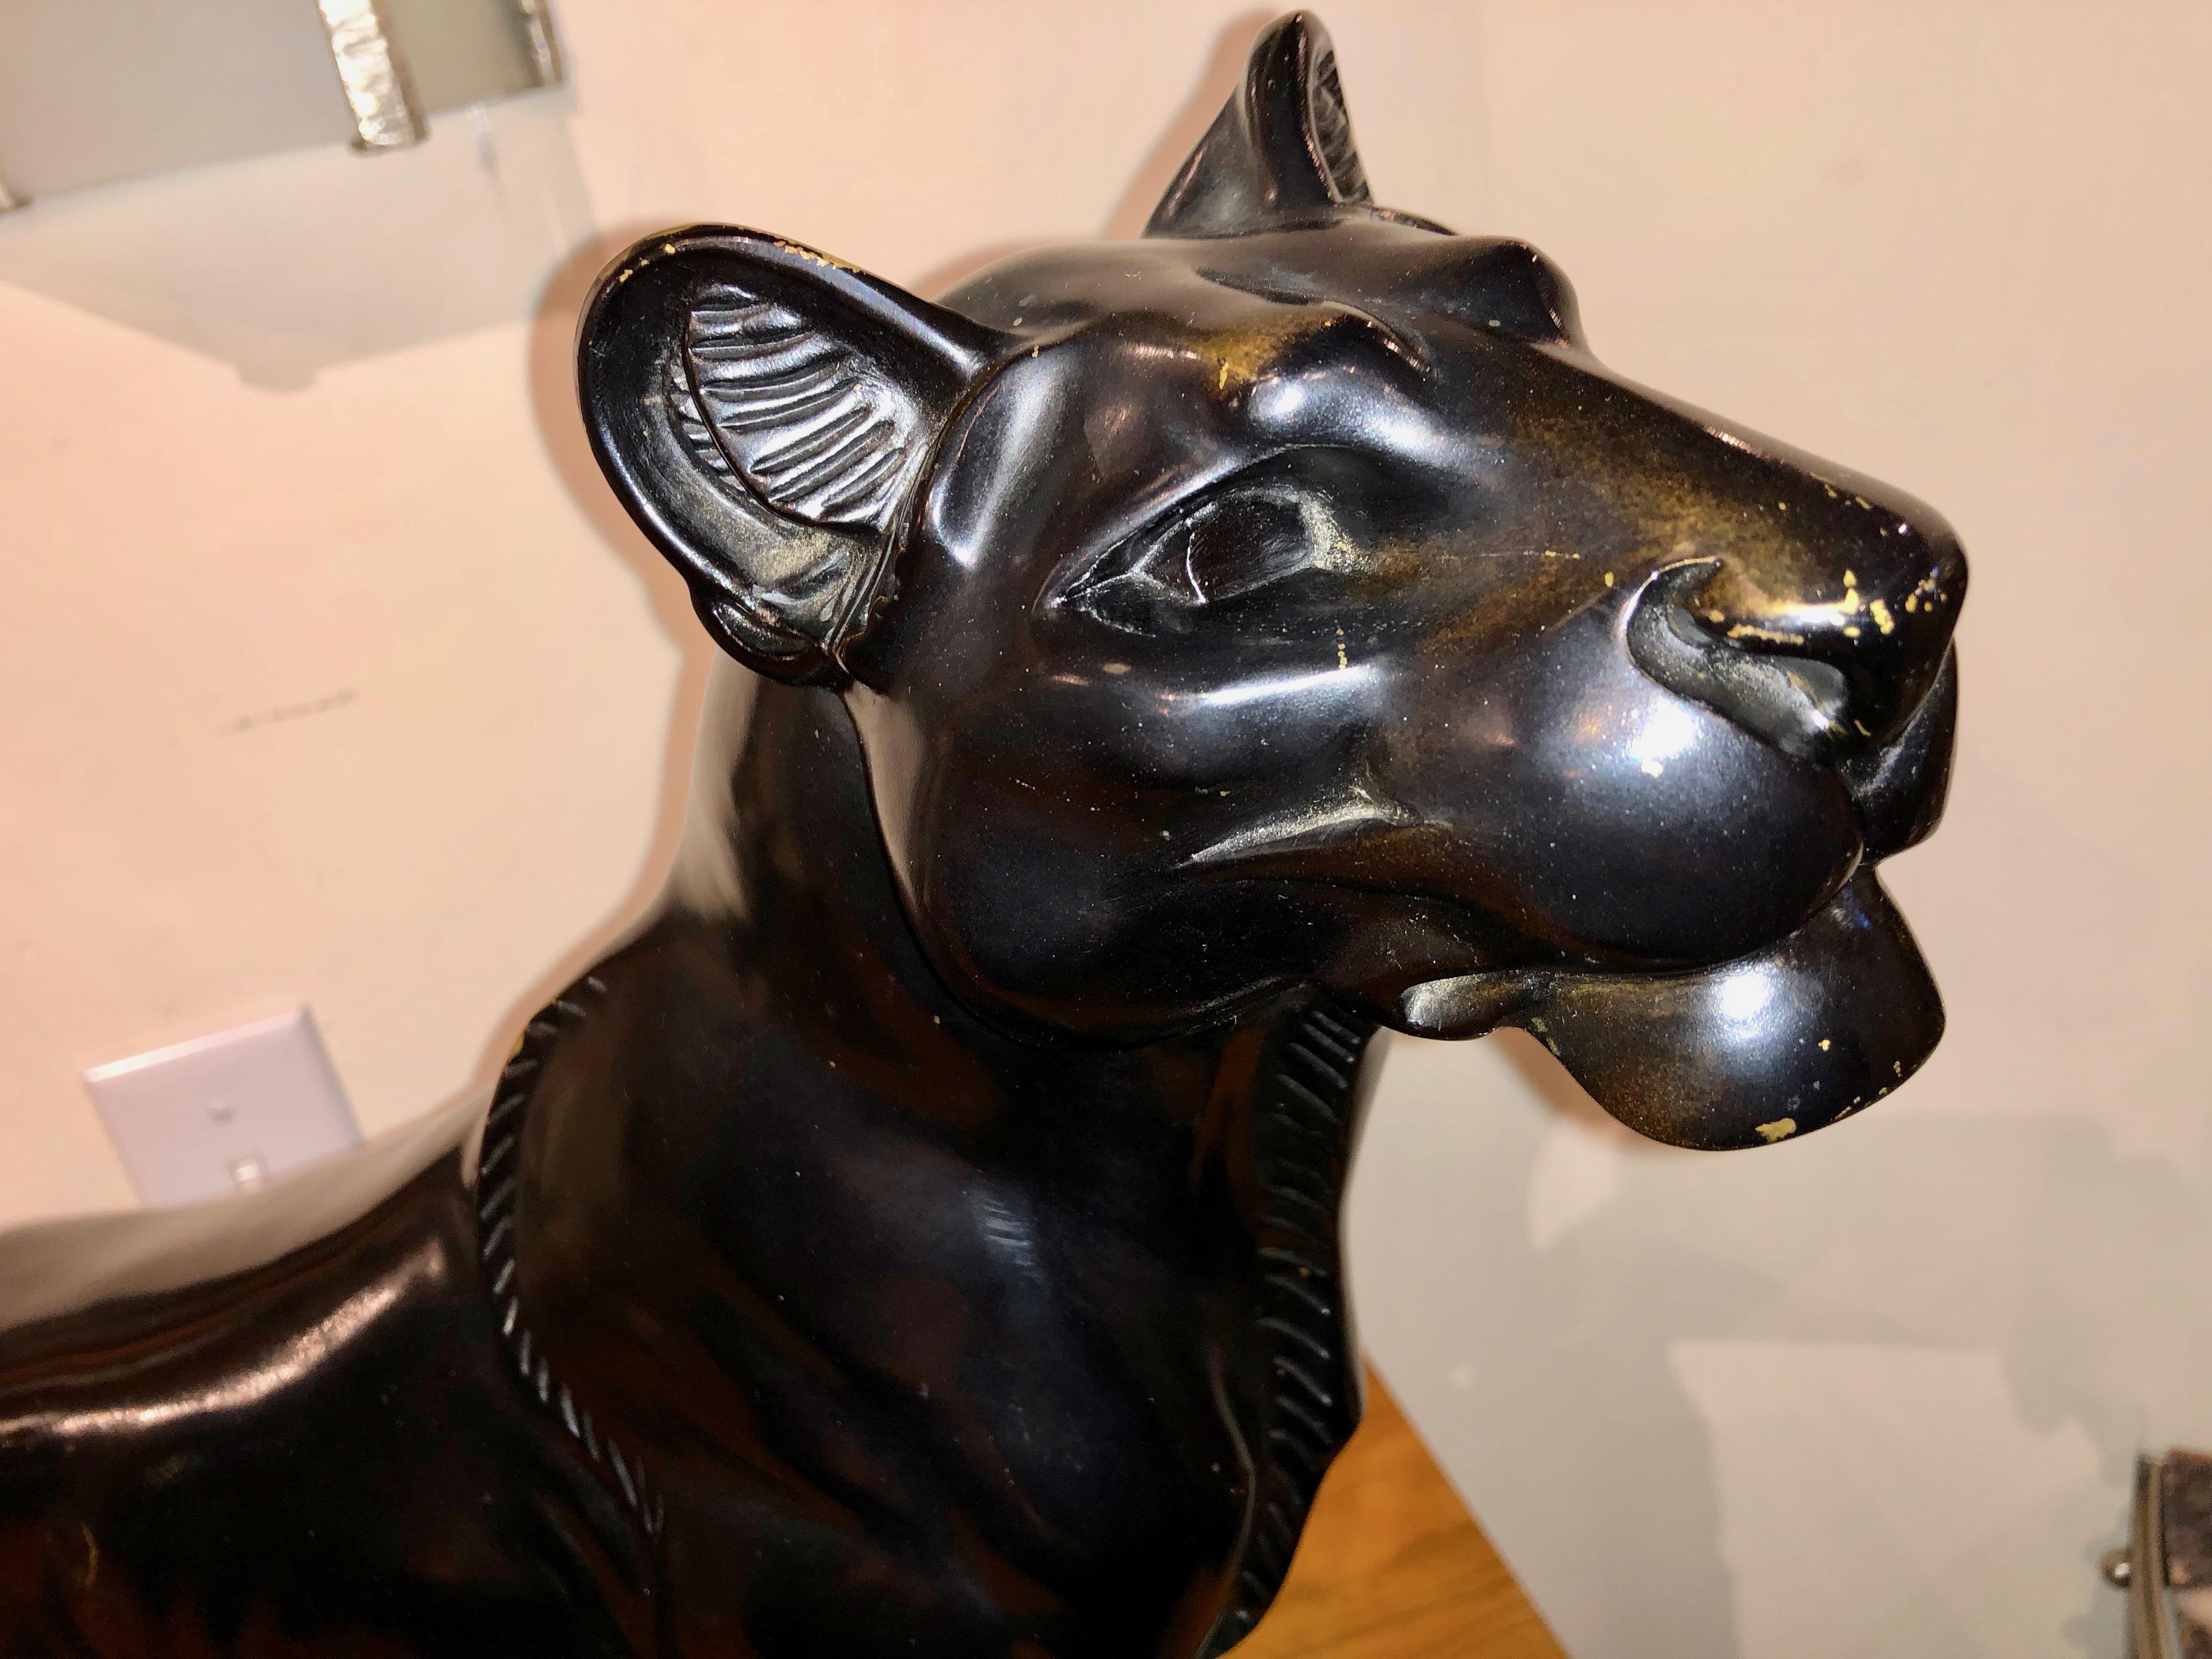 Extremely rare black panther bronze sculpture by Louis Albert Carvin circa 1930. This is an example of pure cubist style in black patina, portraying a panther standing tall and proud. This fiercely cast feline has detailed musculature and sleek